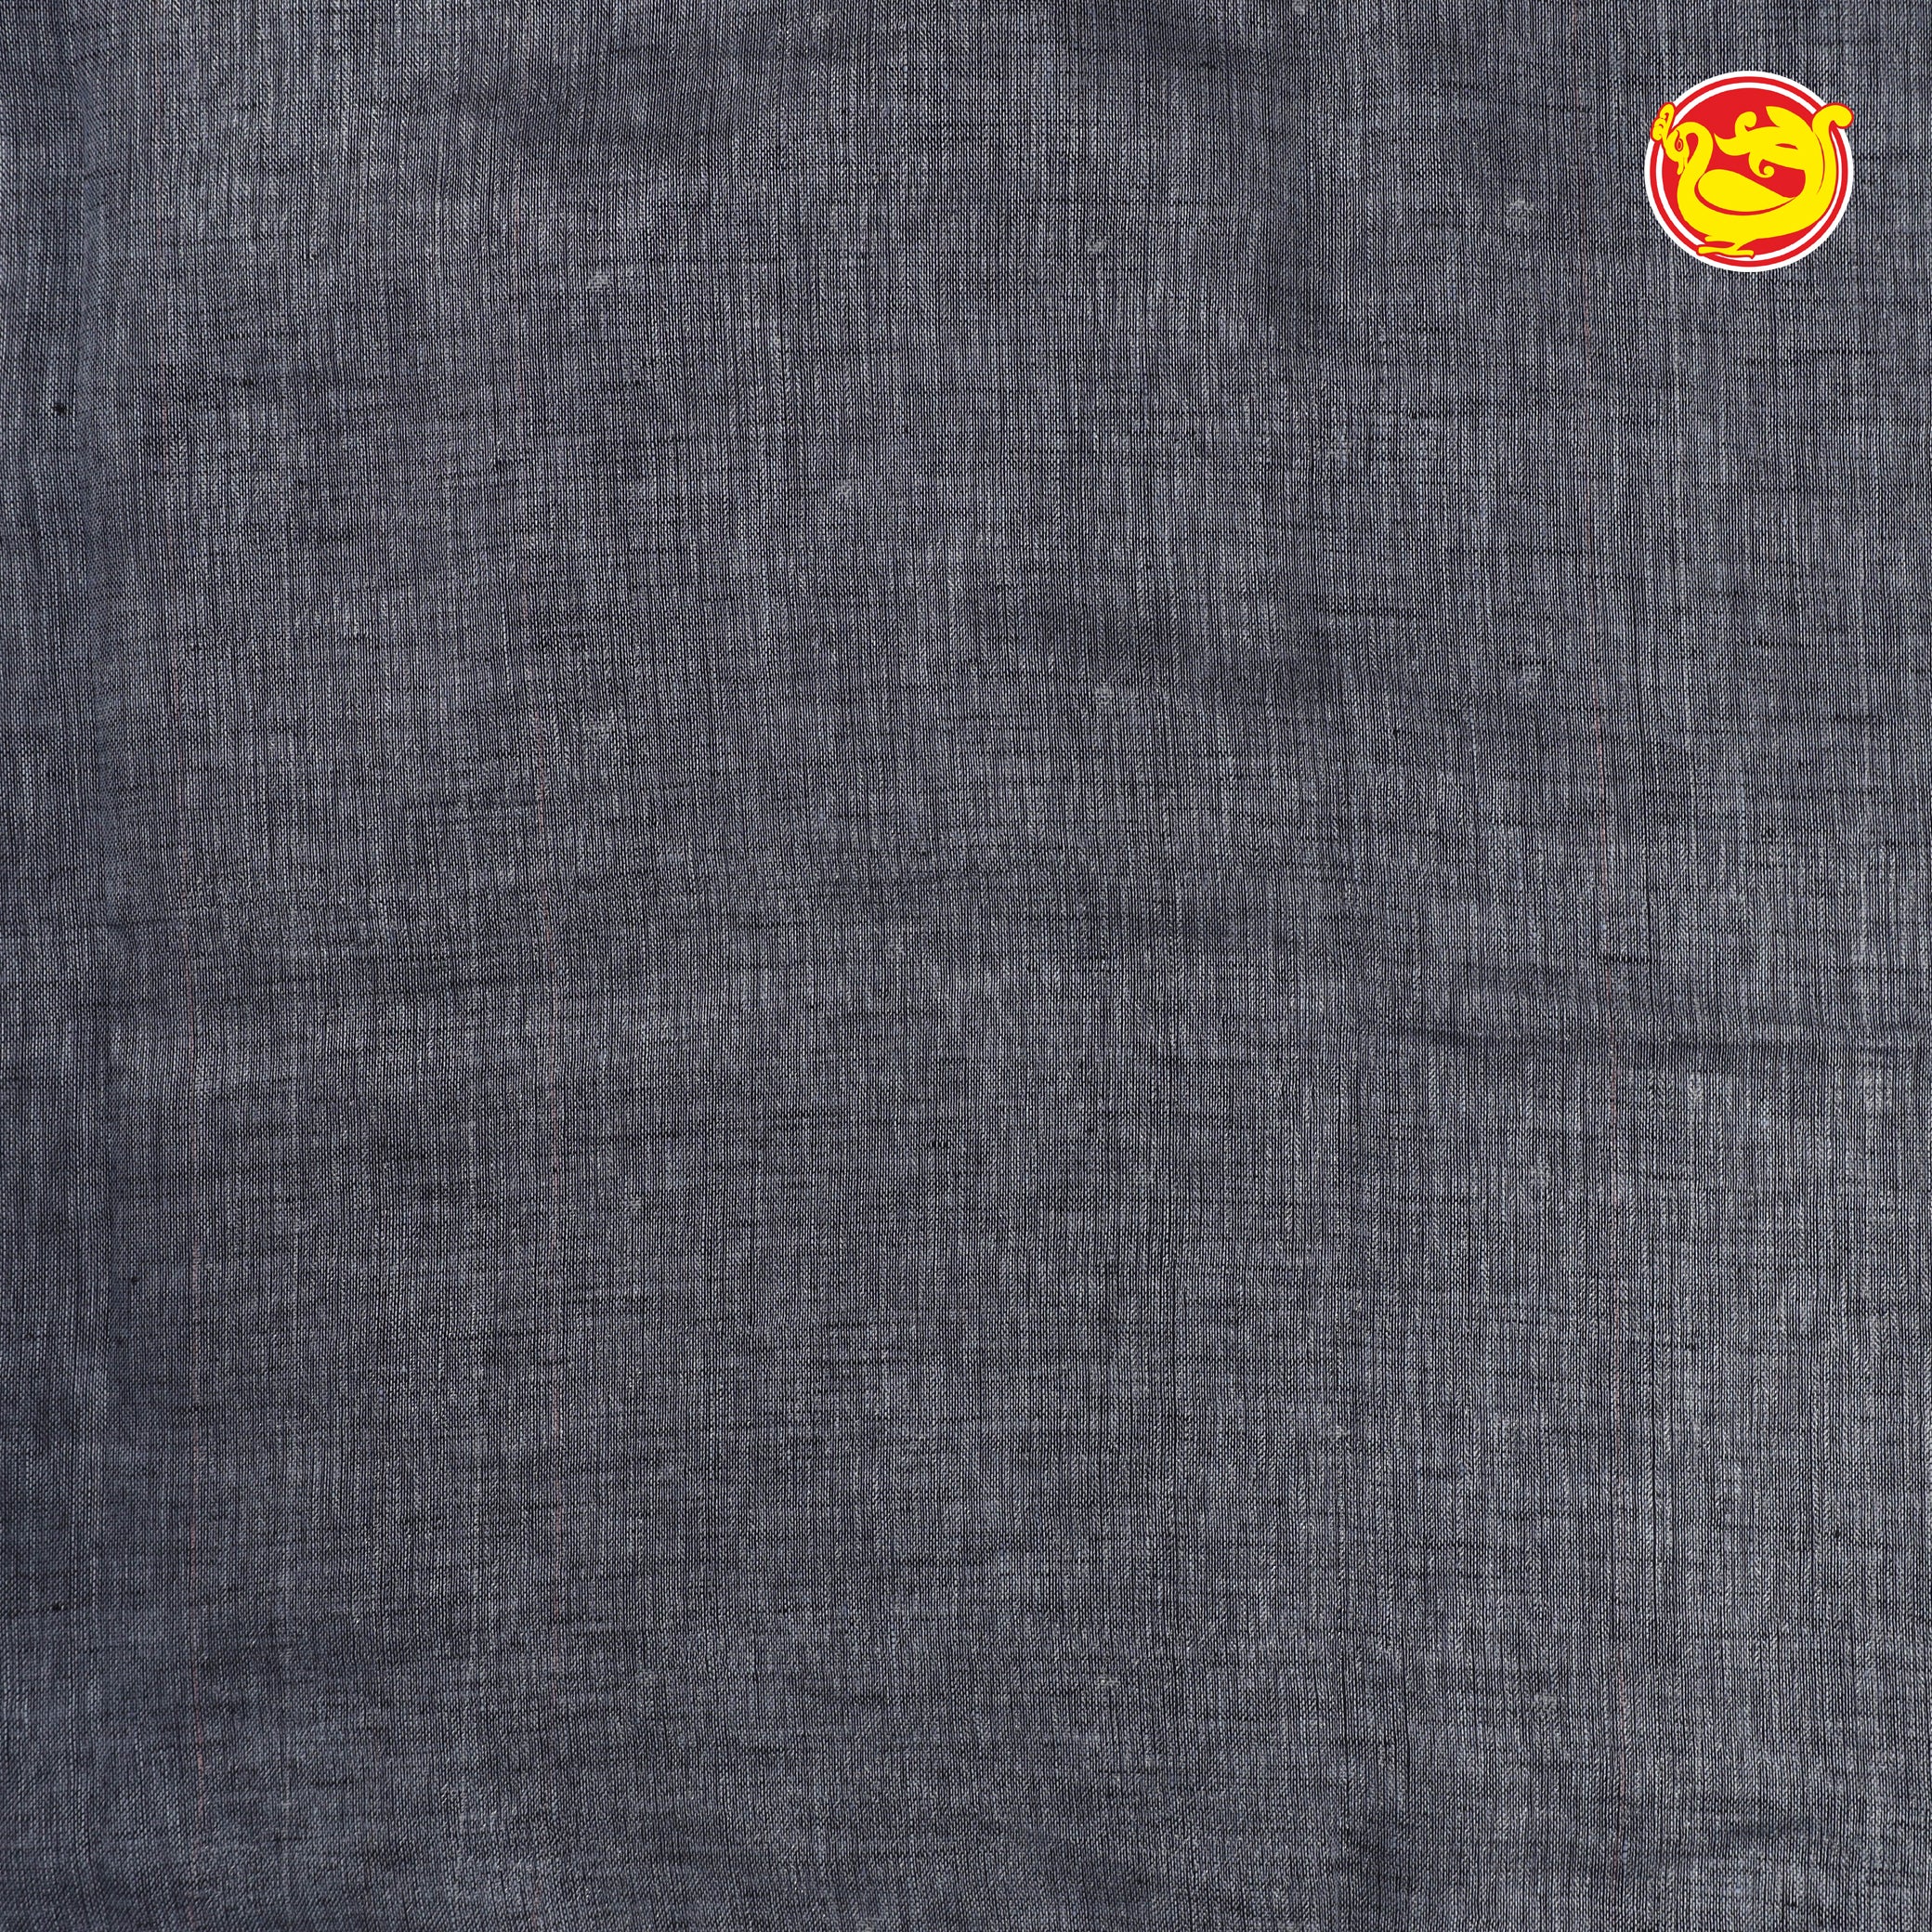 Grey linen saree with hand embroidery